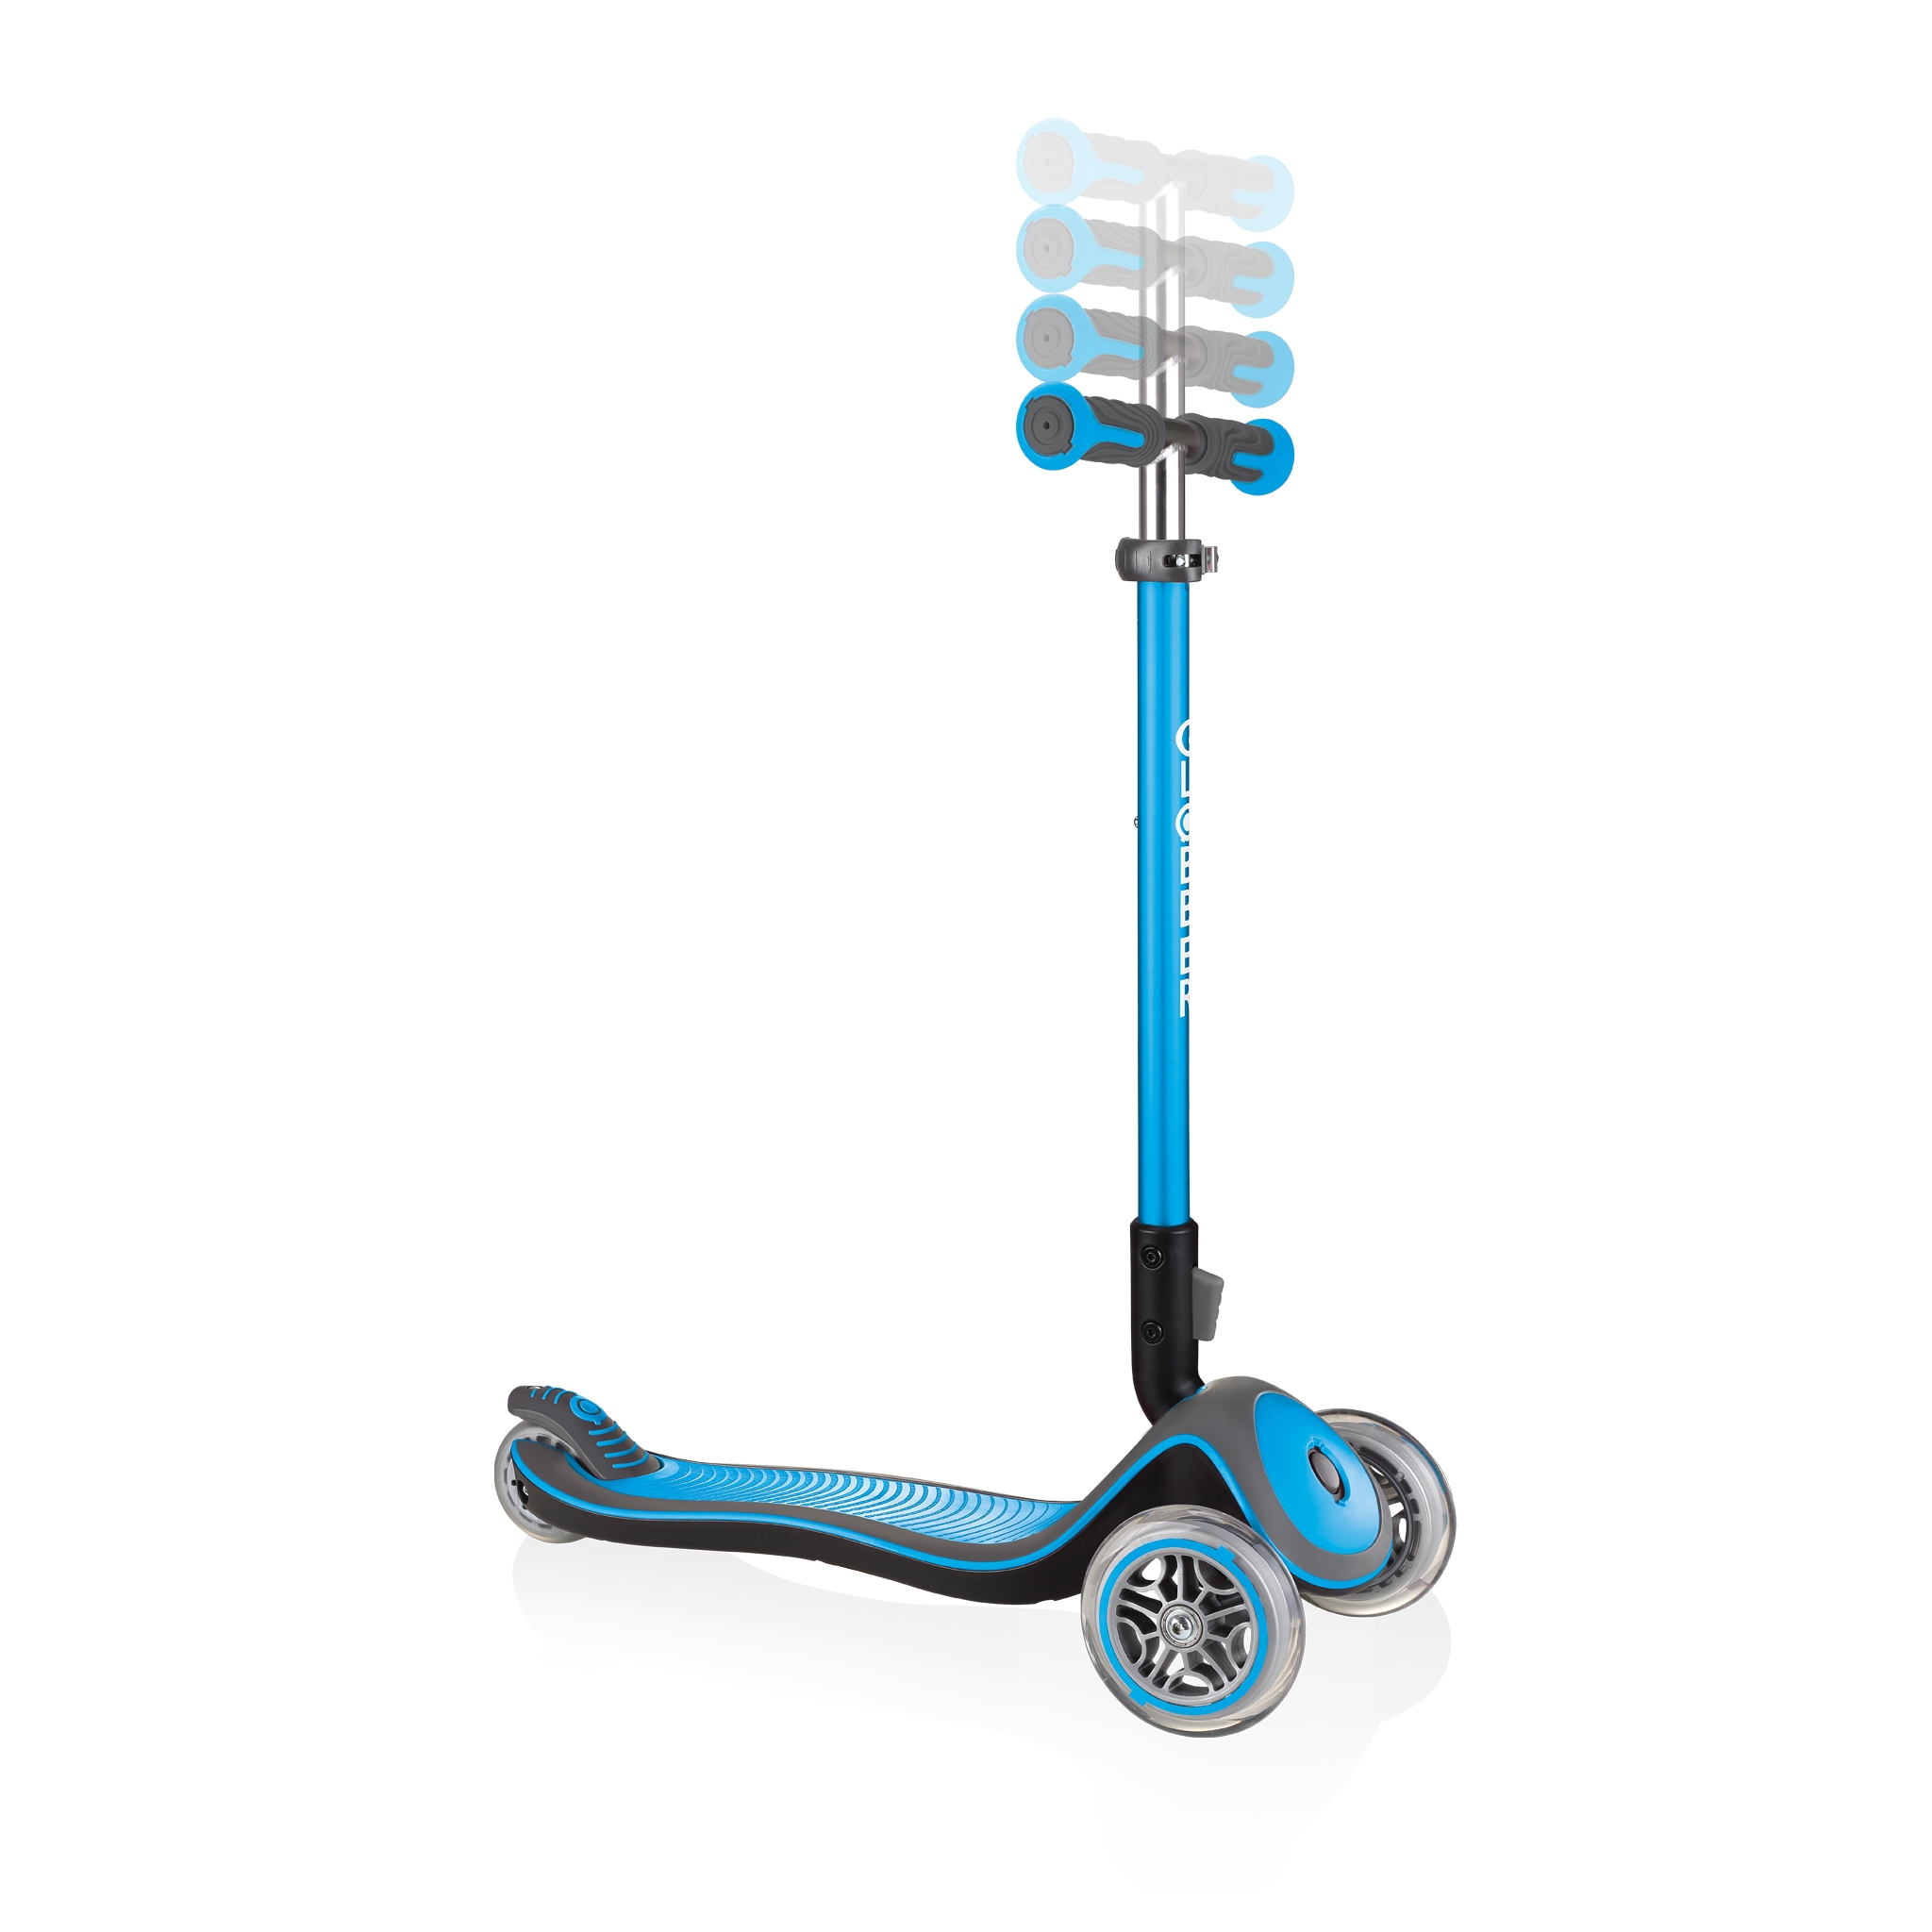 Globber-ELITE-DELUXE-3-wheel-adjustable-scooter-for-kids-with-anodized-T-bar-sky-blue 1